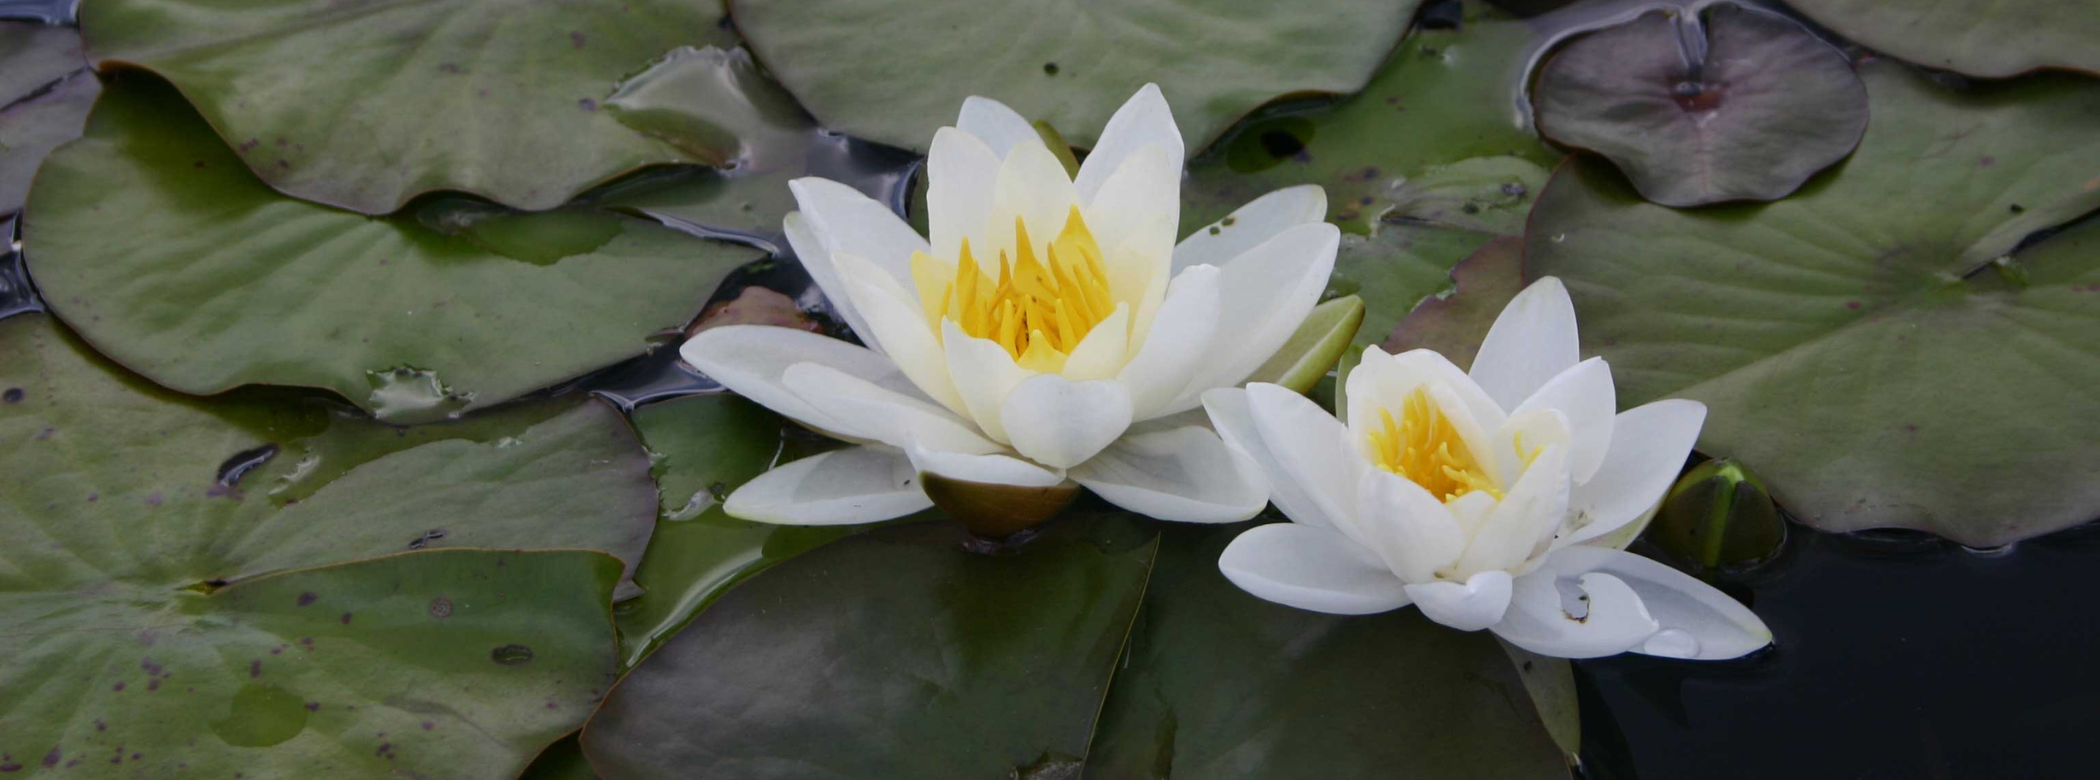 Close up on two white water lily flowers among a cluster of green lily pads on the water's surface.